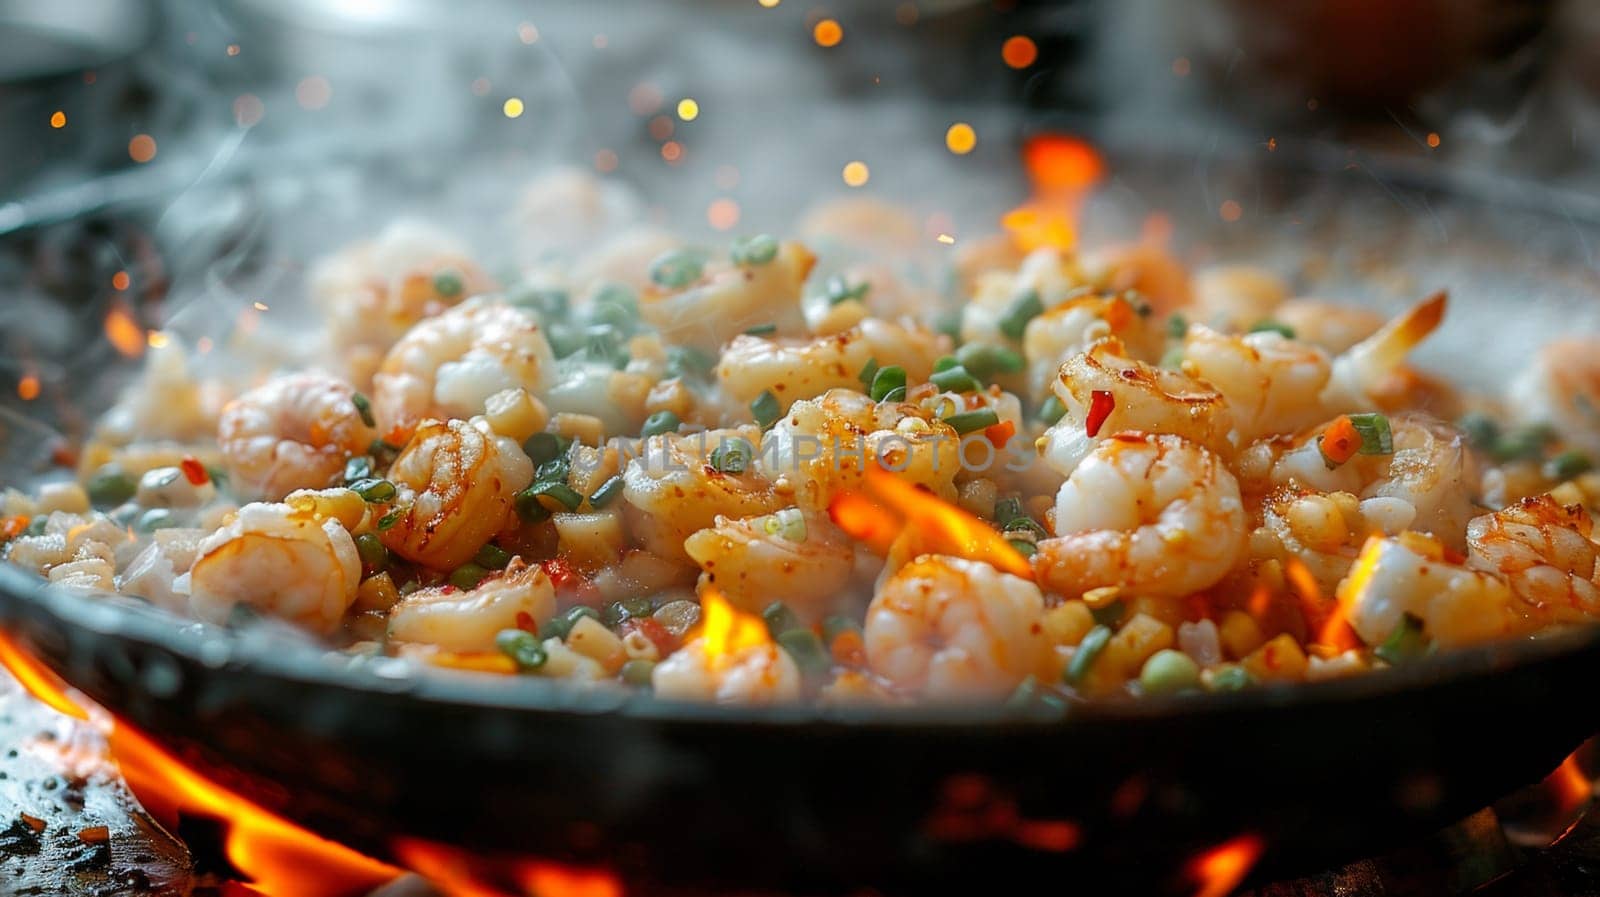 A pan of a wok filled with shrimp and vegetables on fire, AI by starush